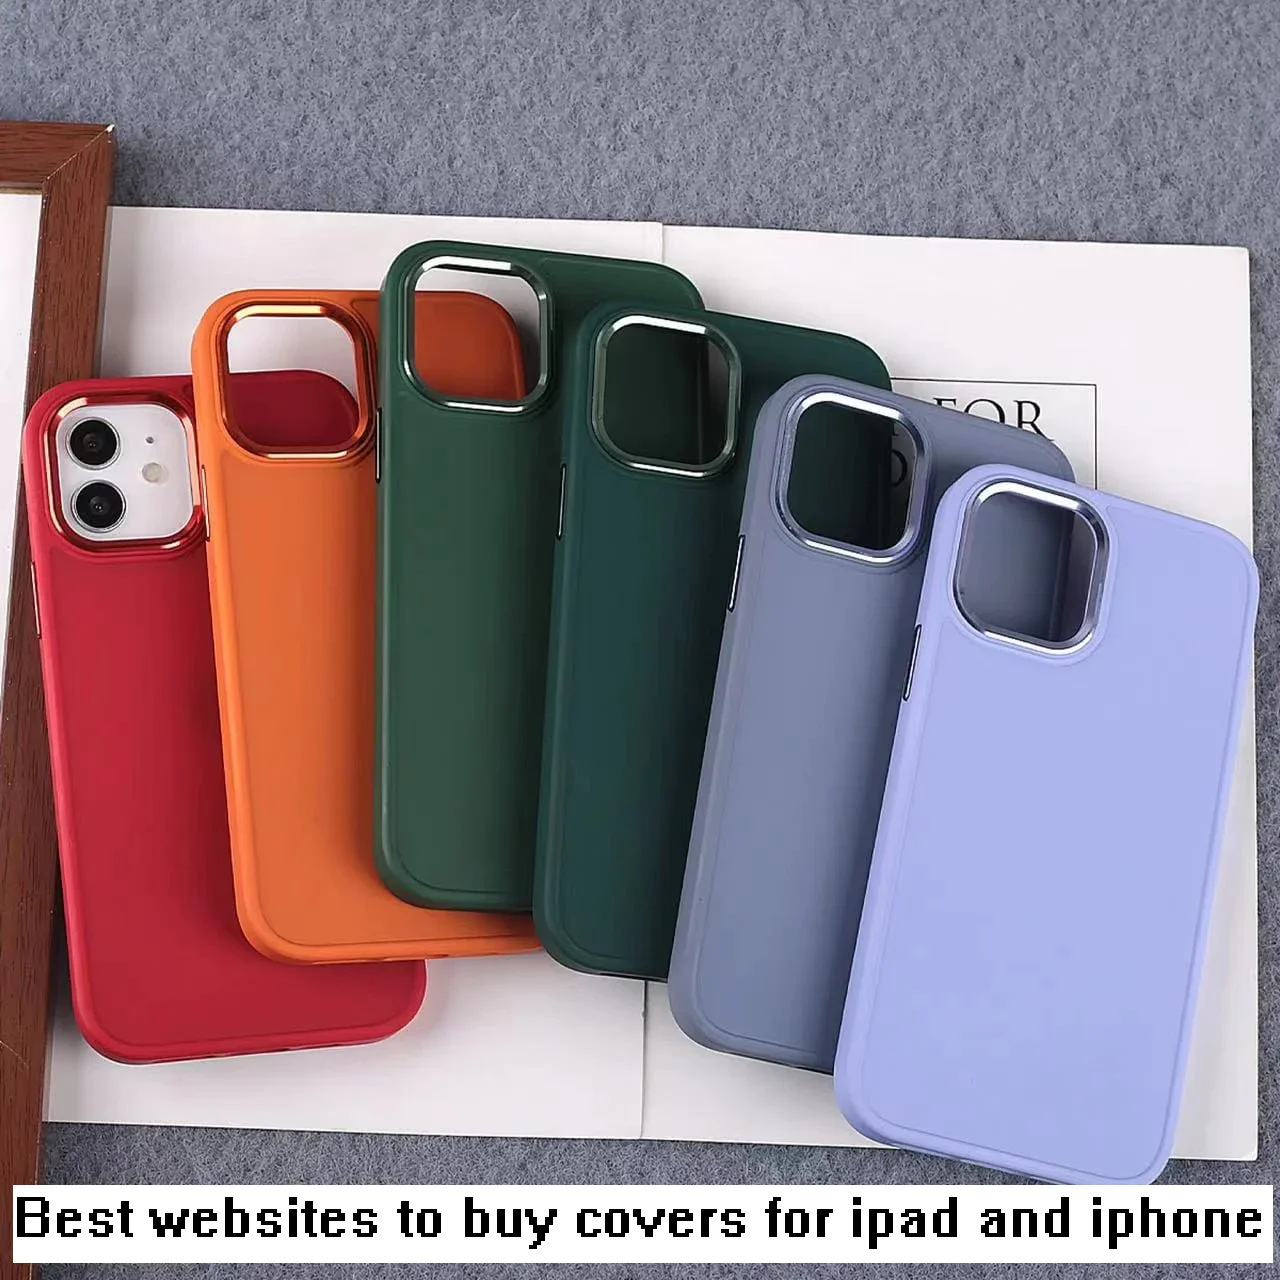 Best websites to buy covers for ipad and iphone